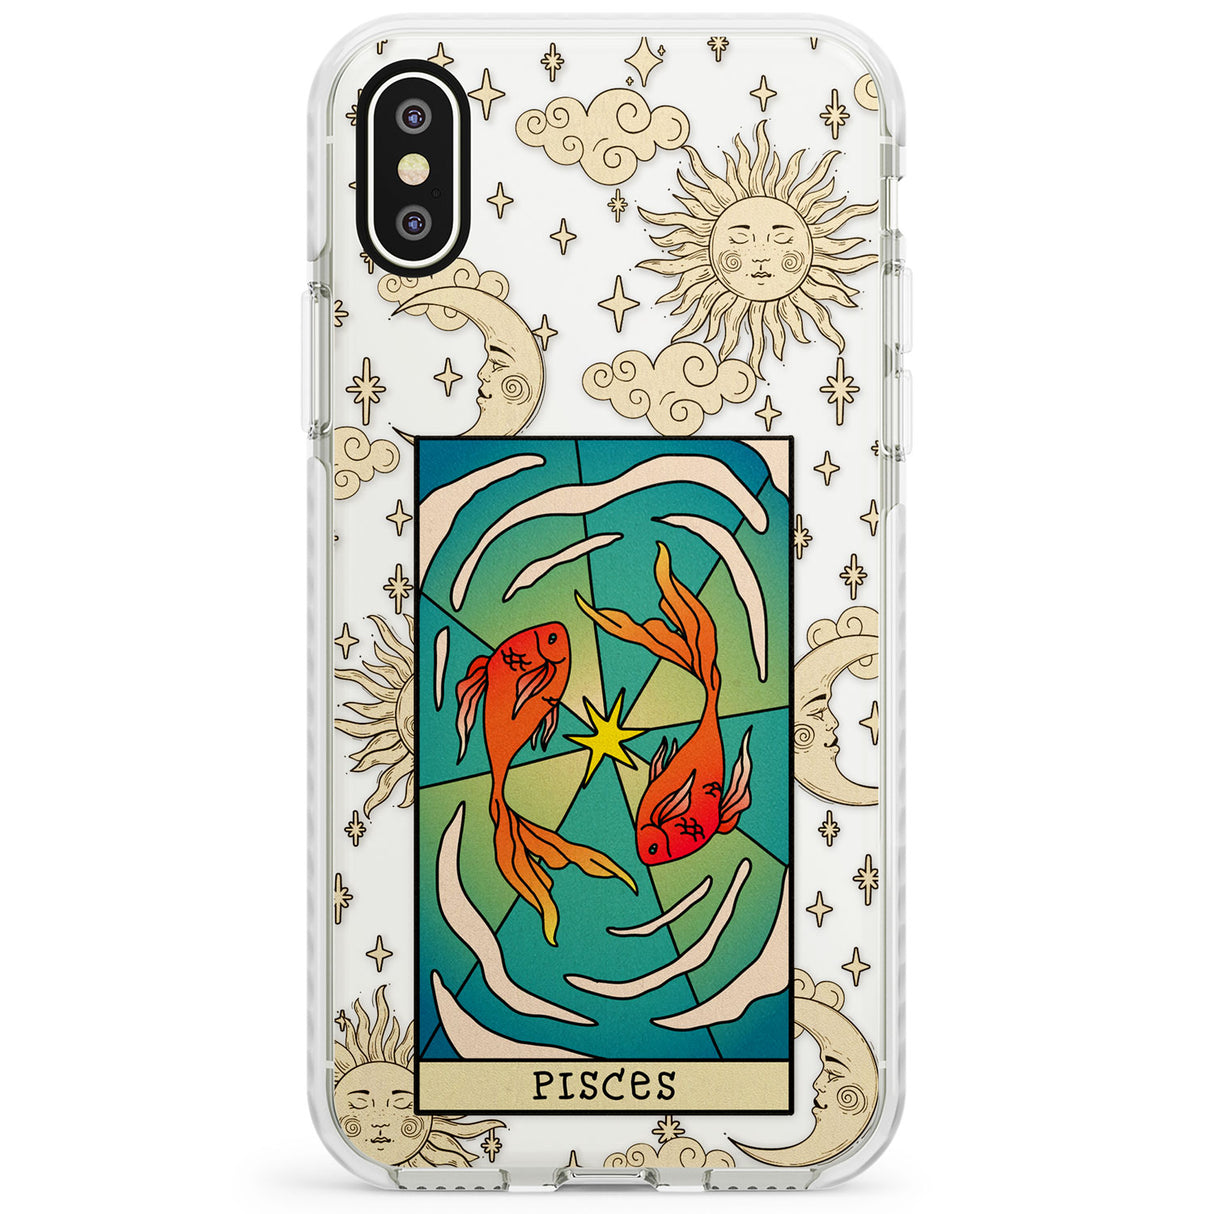 Celestial Zodiac - Pisces Impact Phone Case for iPhone X XS Max XR